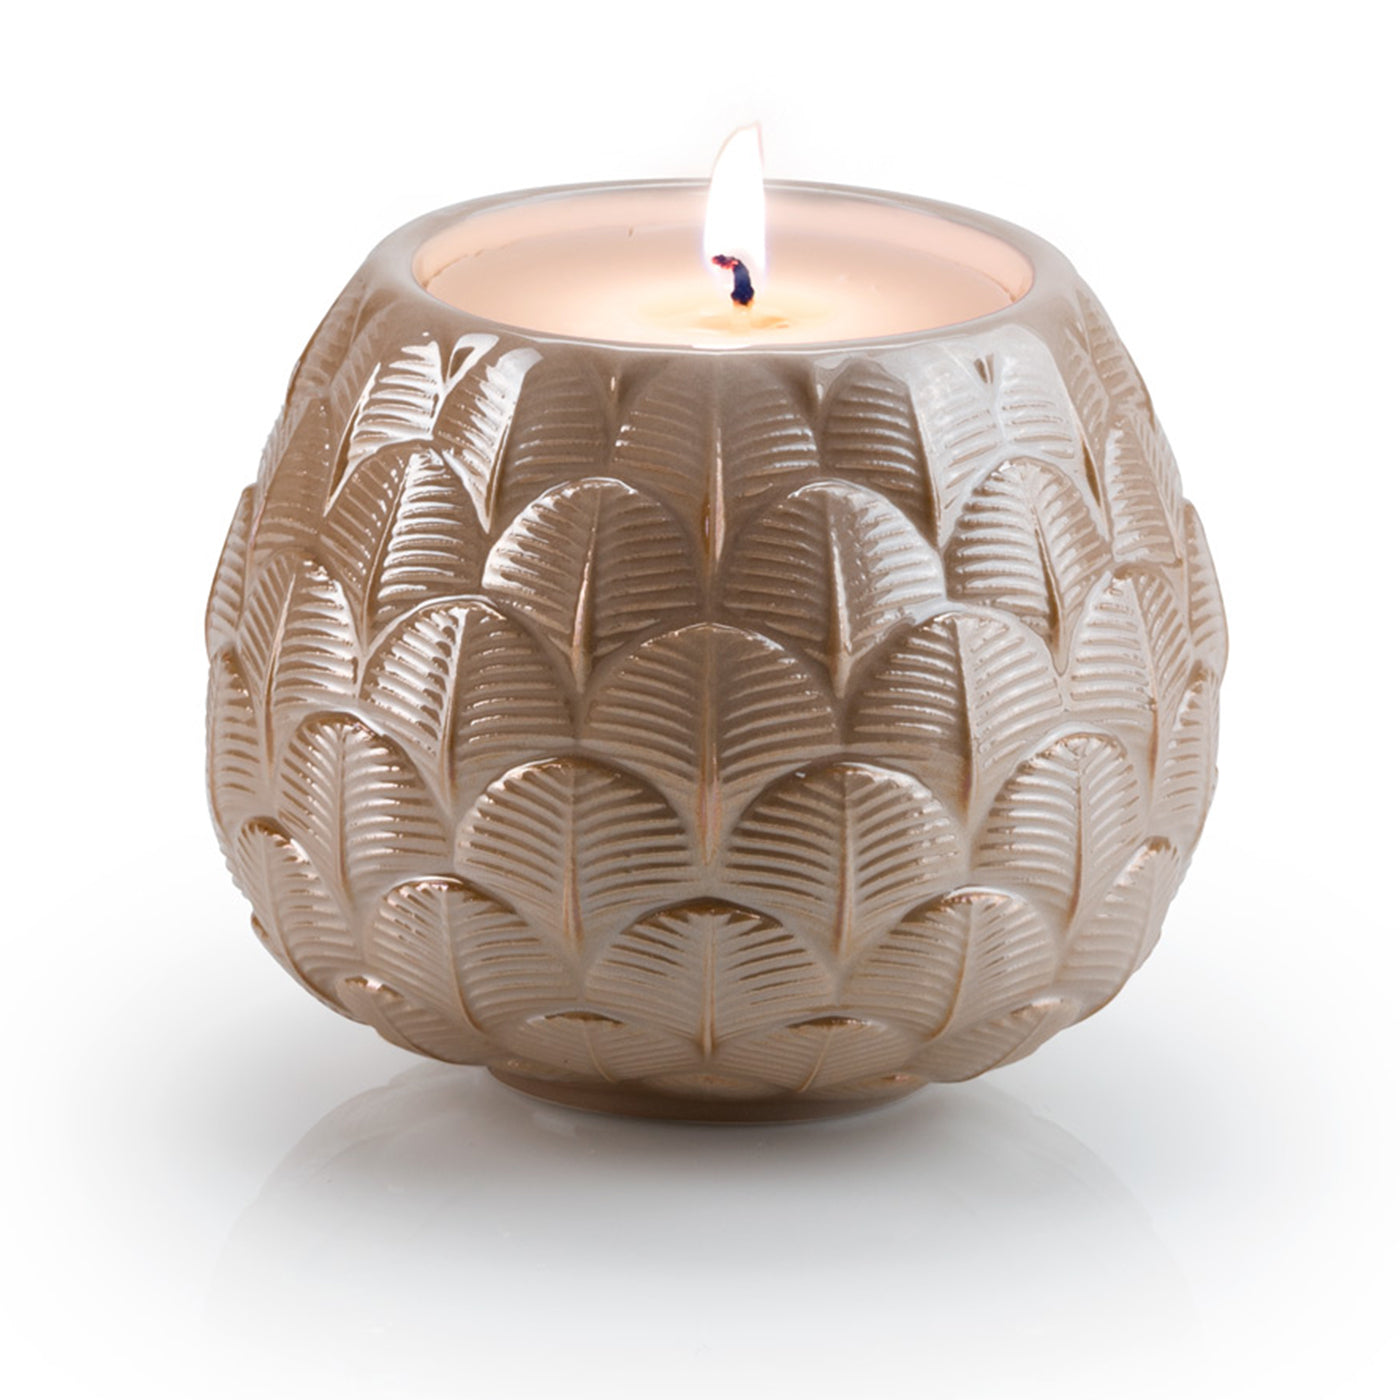 CHARLOTTE PEACOCK CANDLE COVER - BEIGE - Alternative view 1